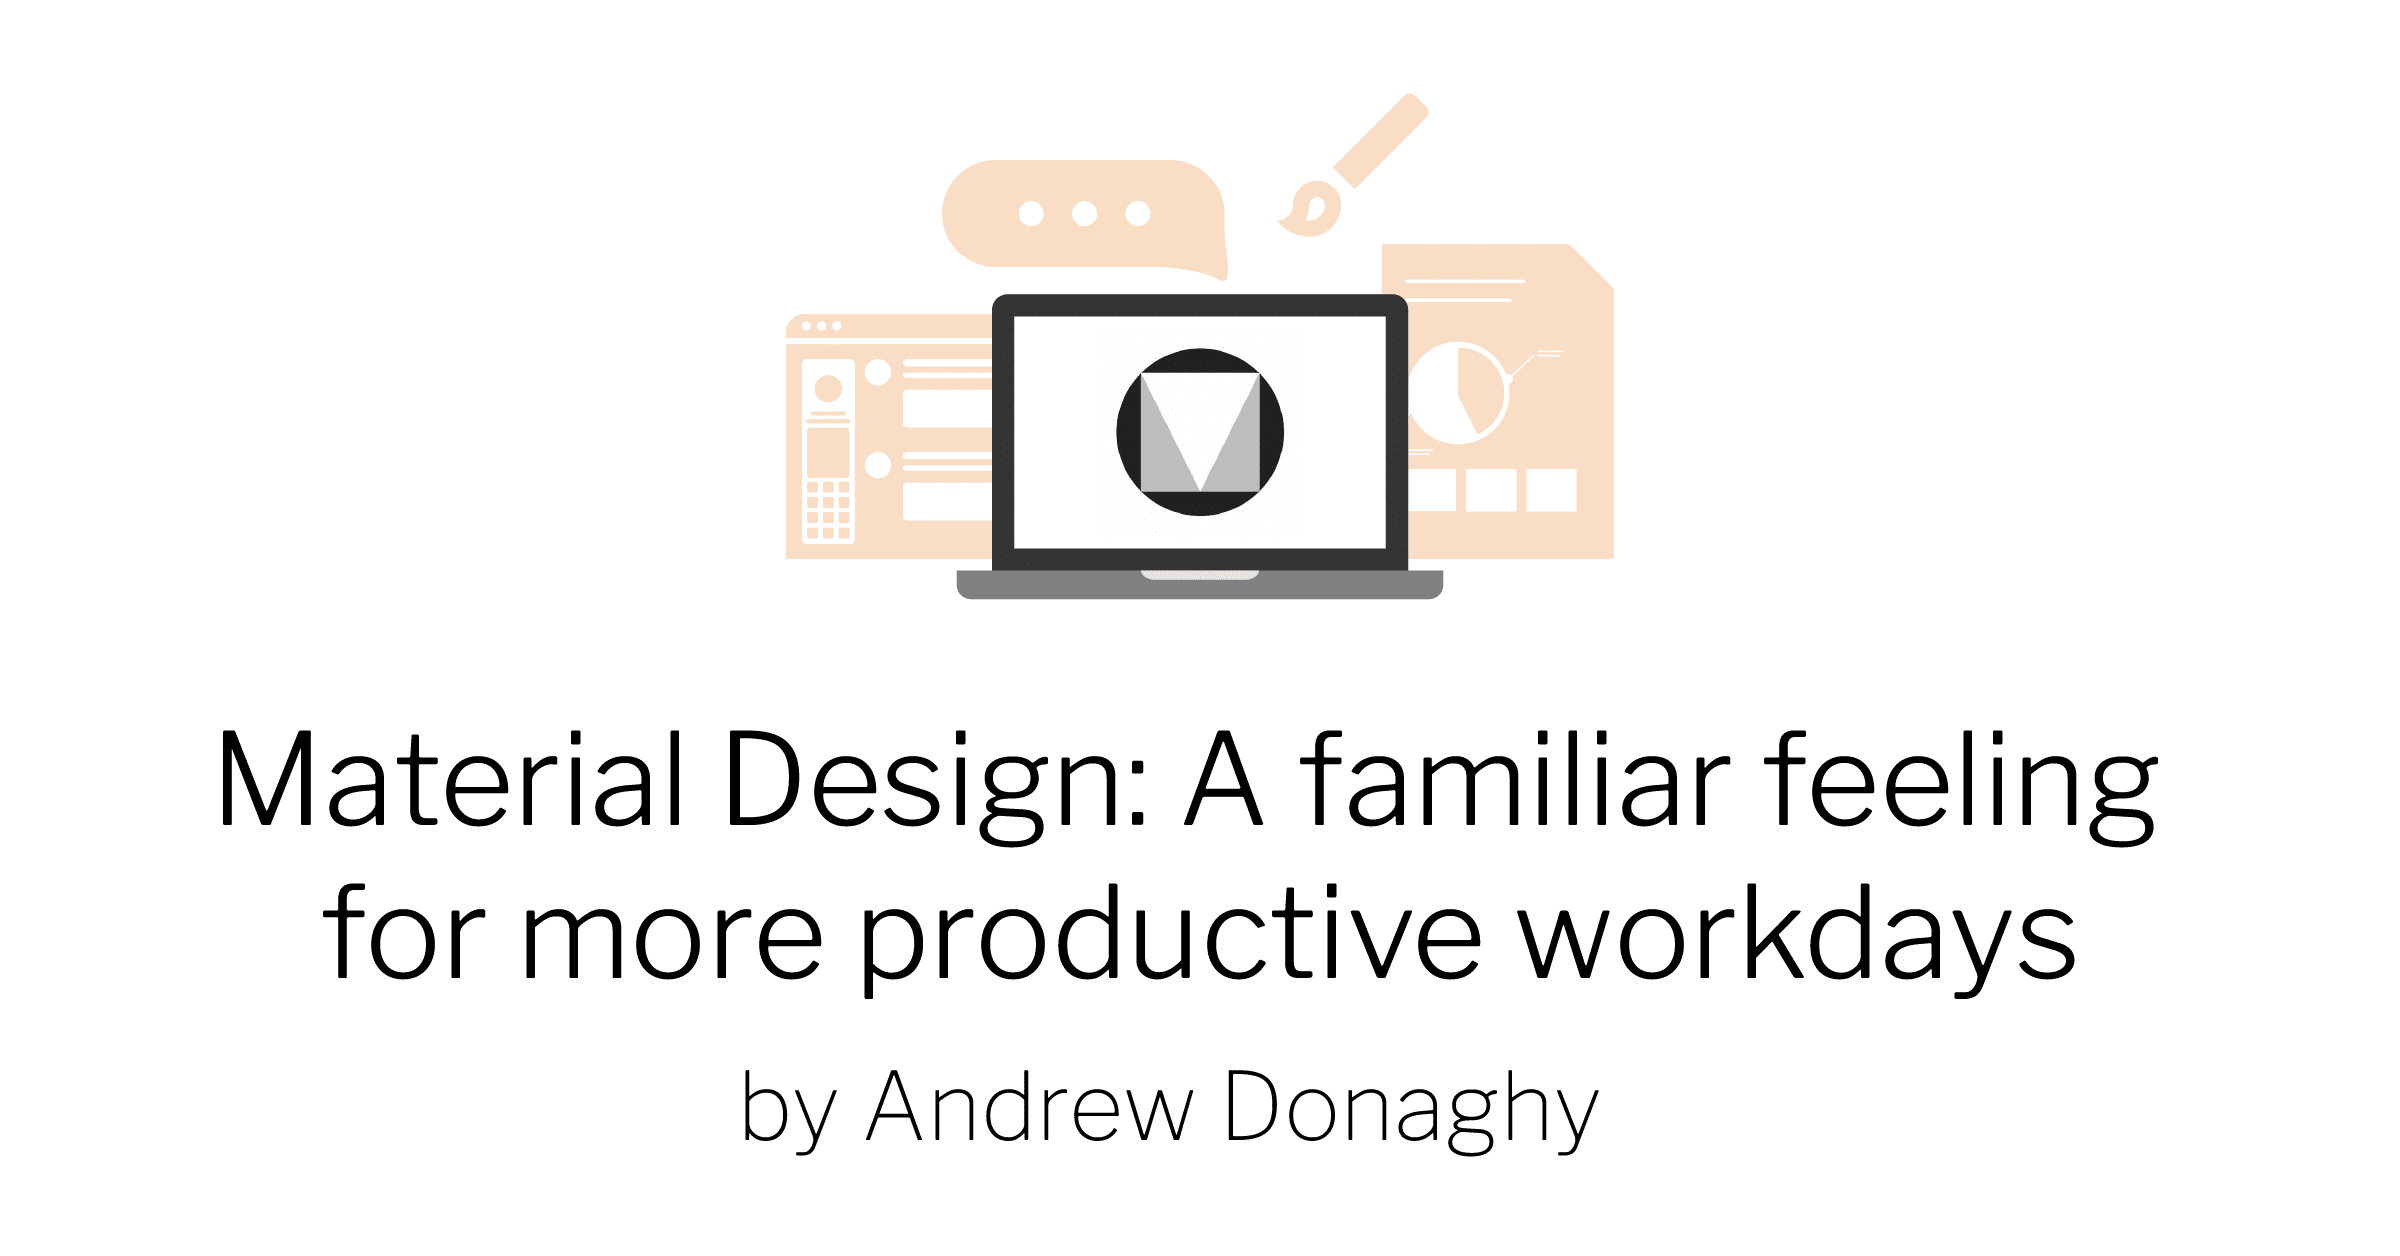 Material design: A familiar feeling for more productive workdays by Andrew Donaghy